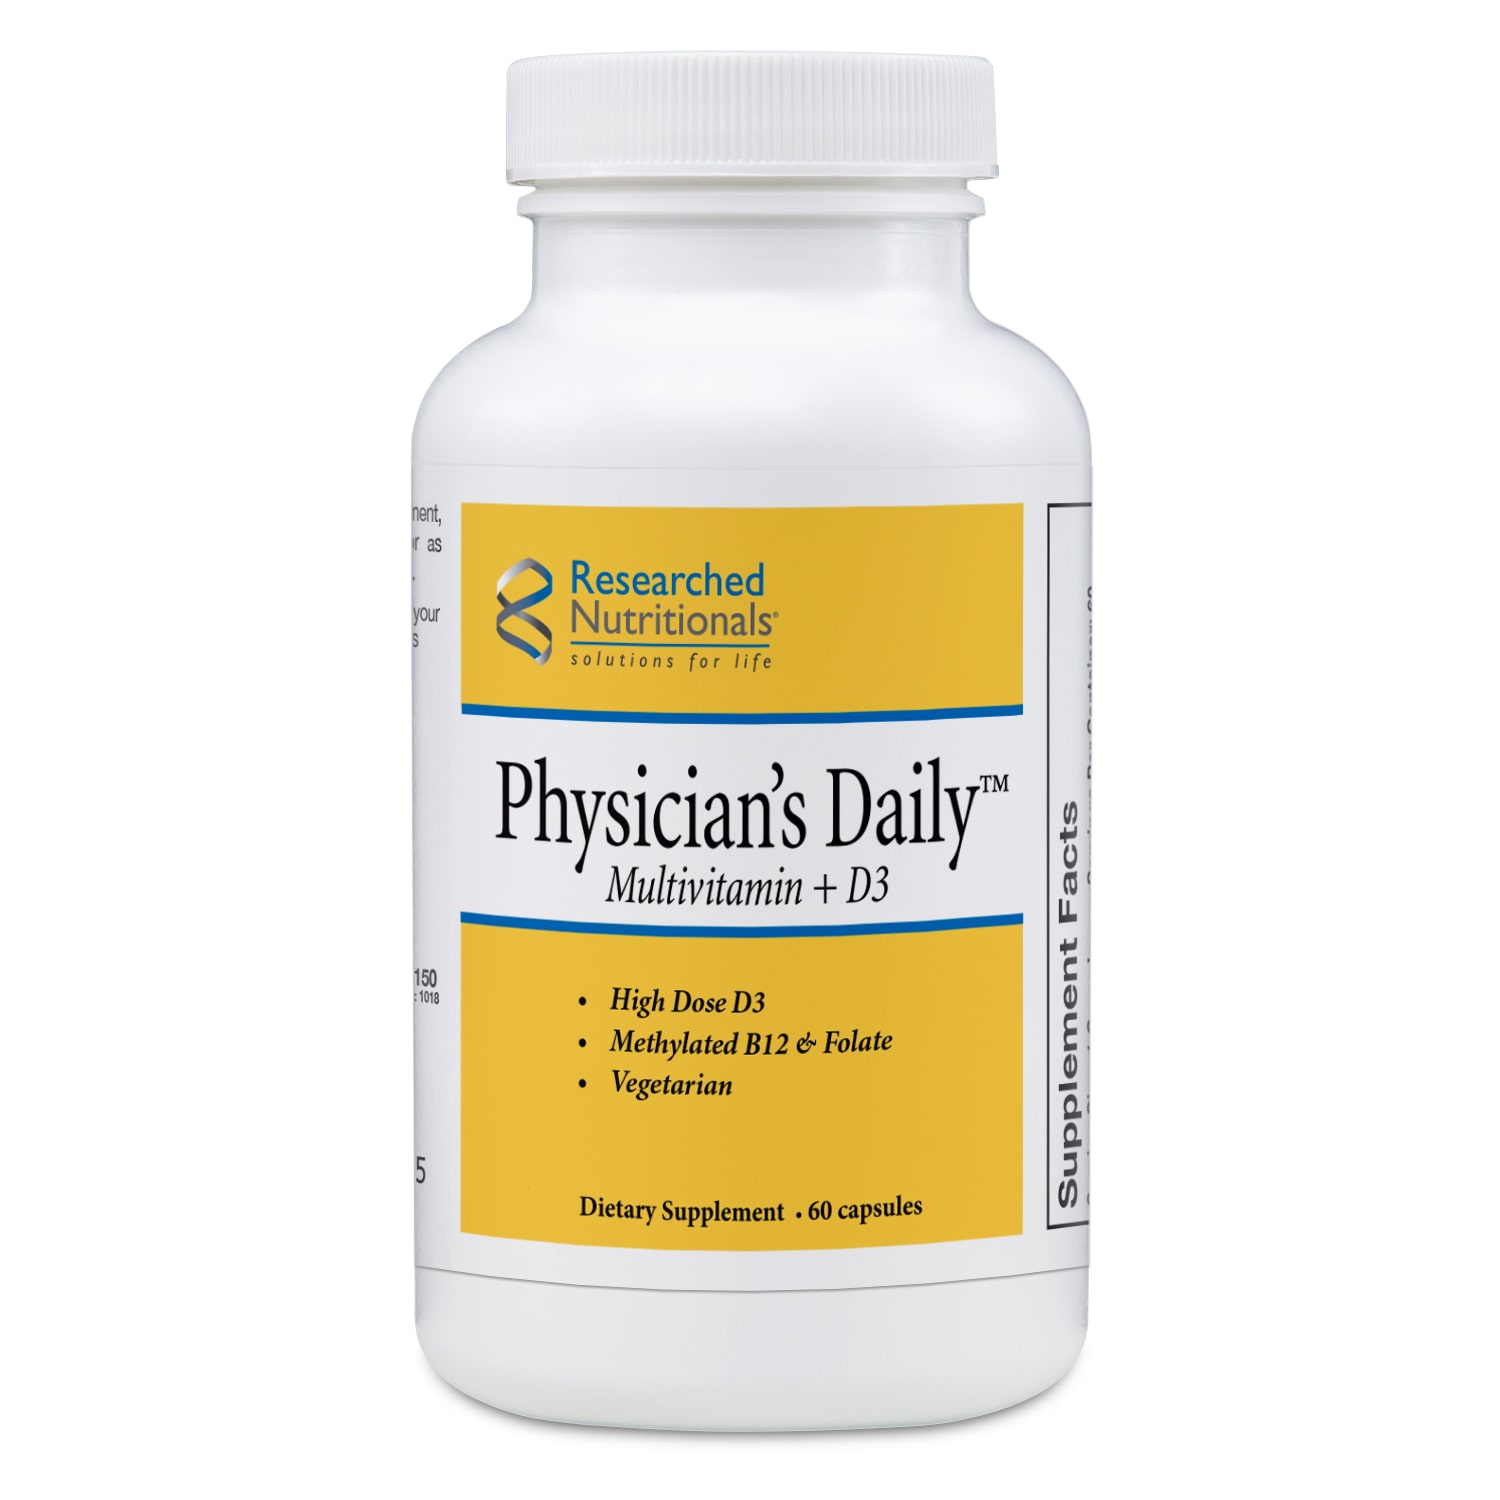 RESEARCHED NUTRITIONALS - Physician’s Daily